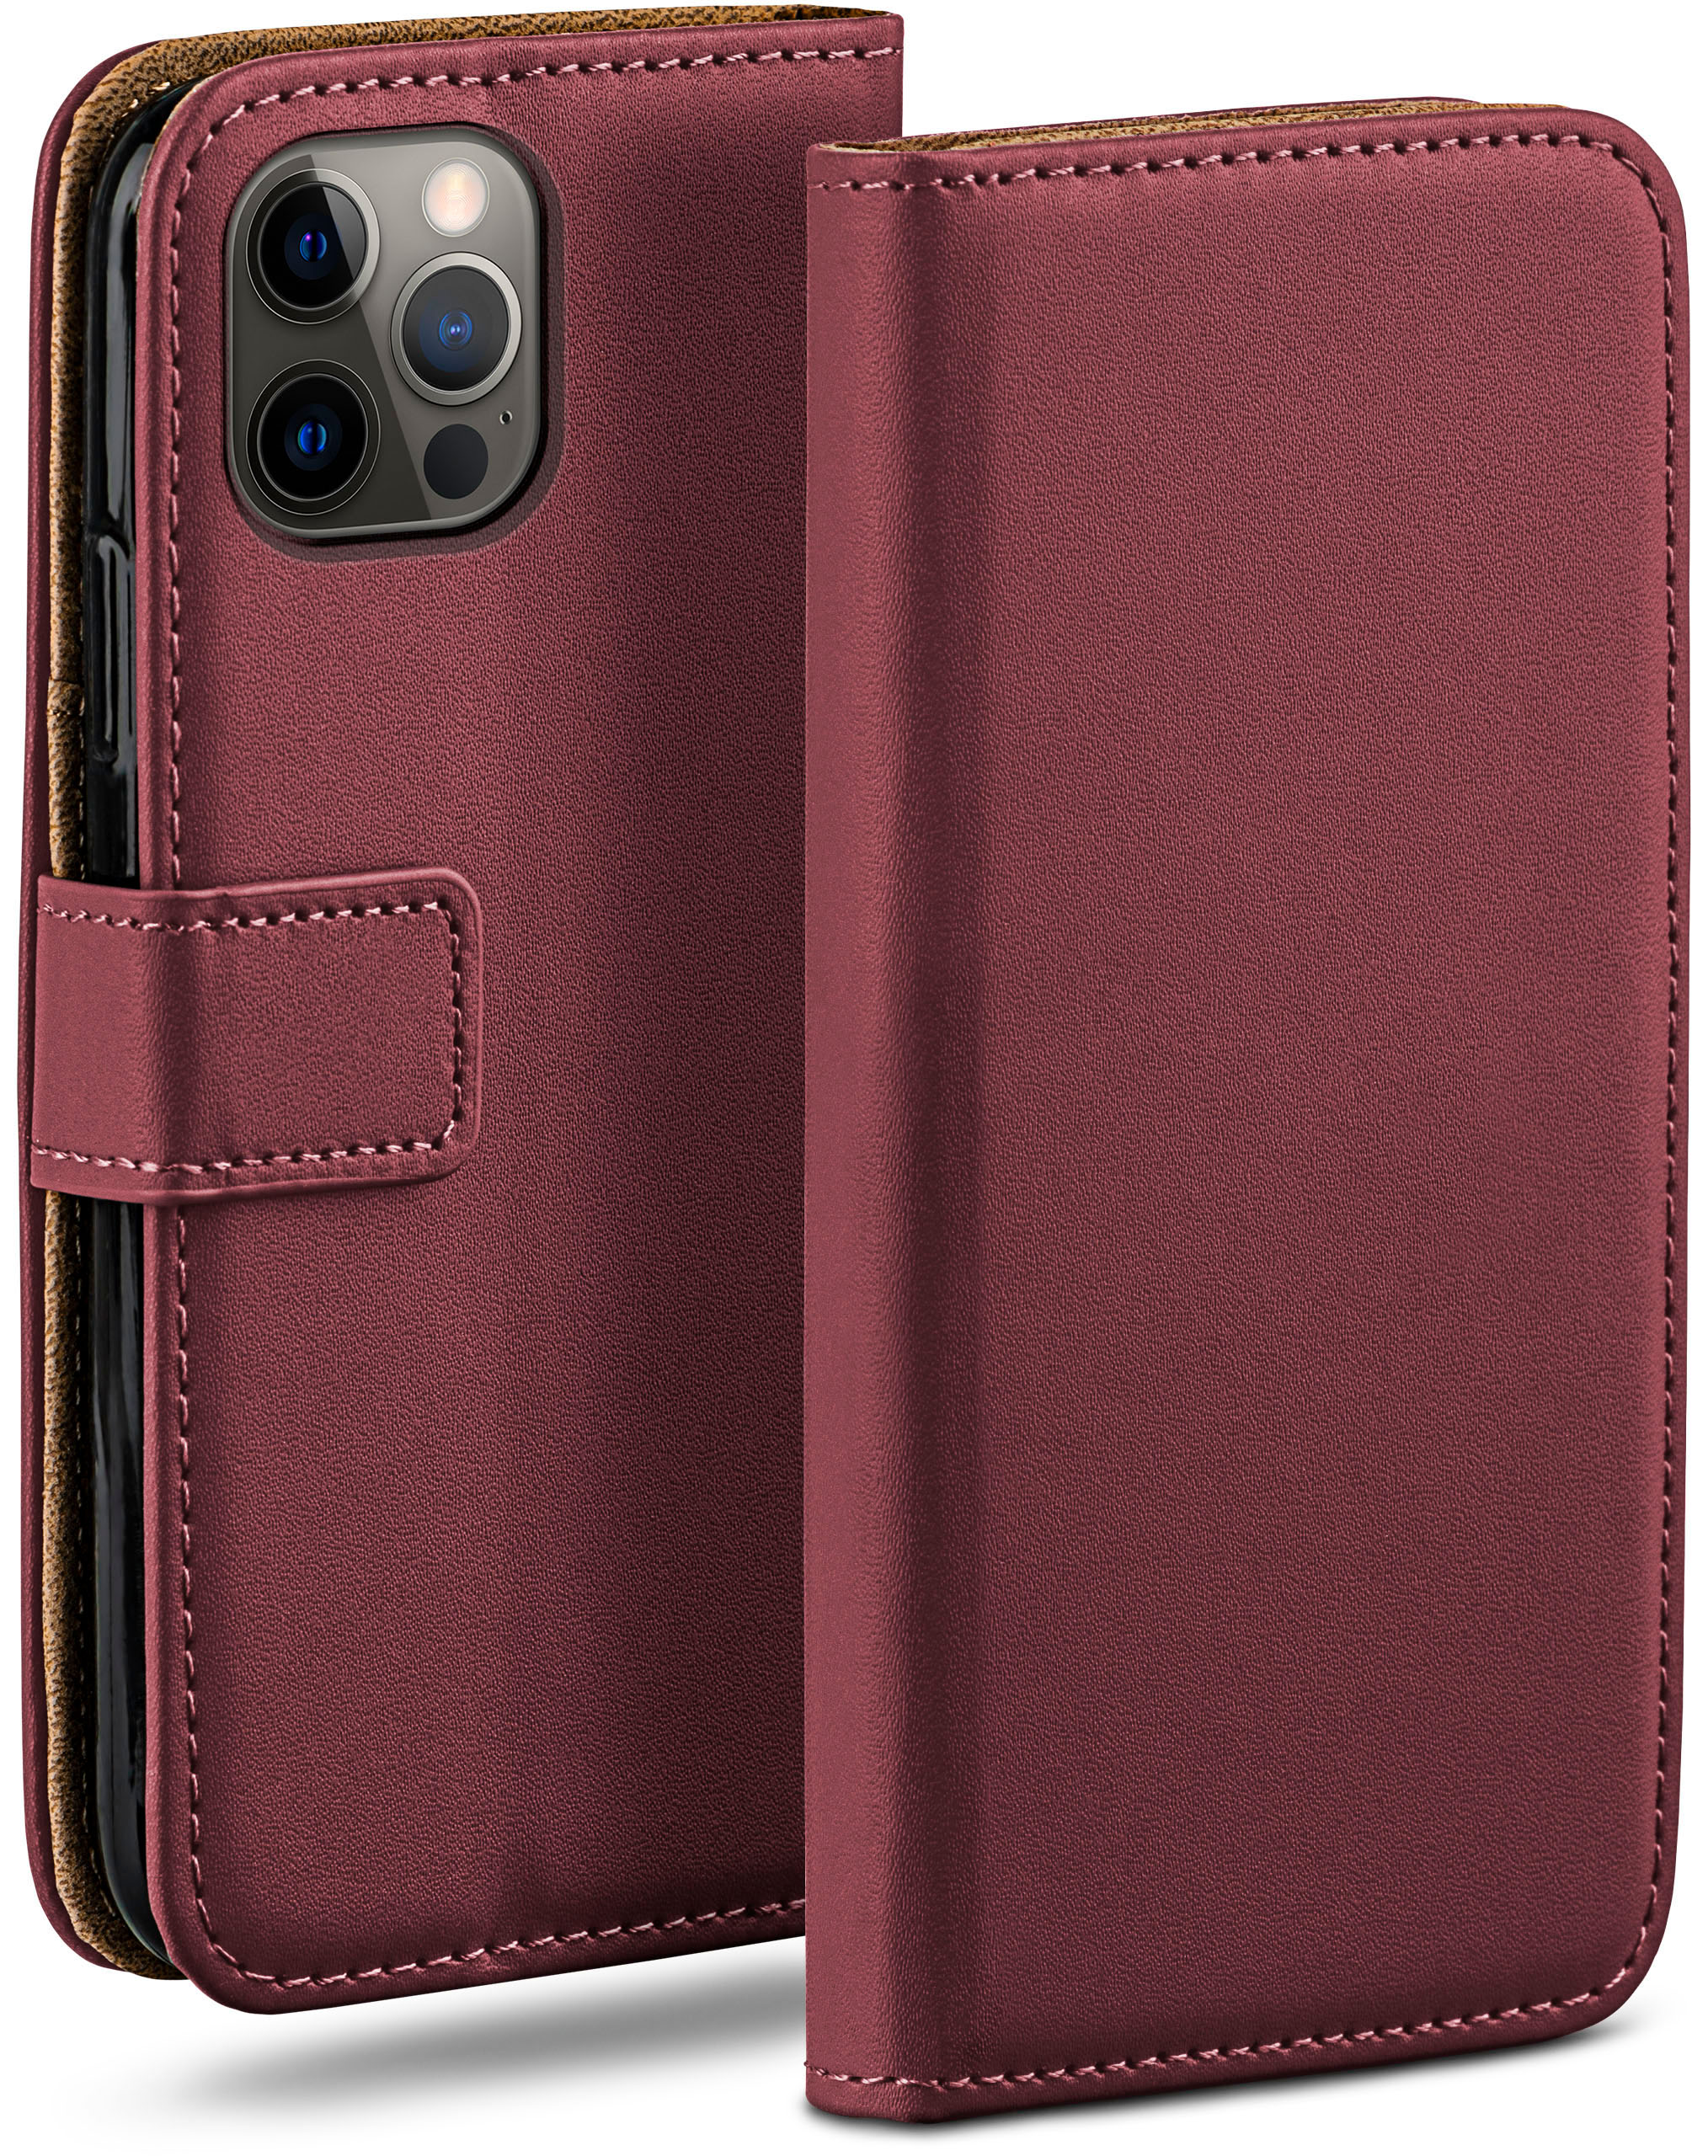 MOEX Book Apple, Pro Bookcover, iPhone 12 Maroon-Red Case, Max